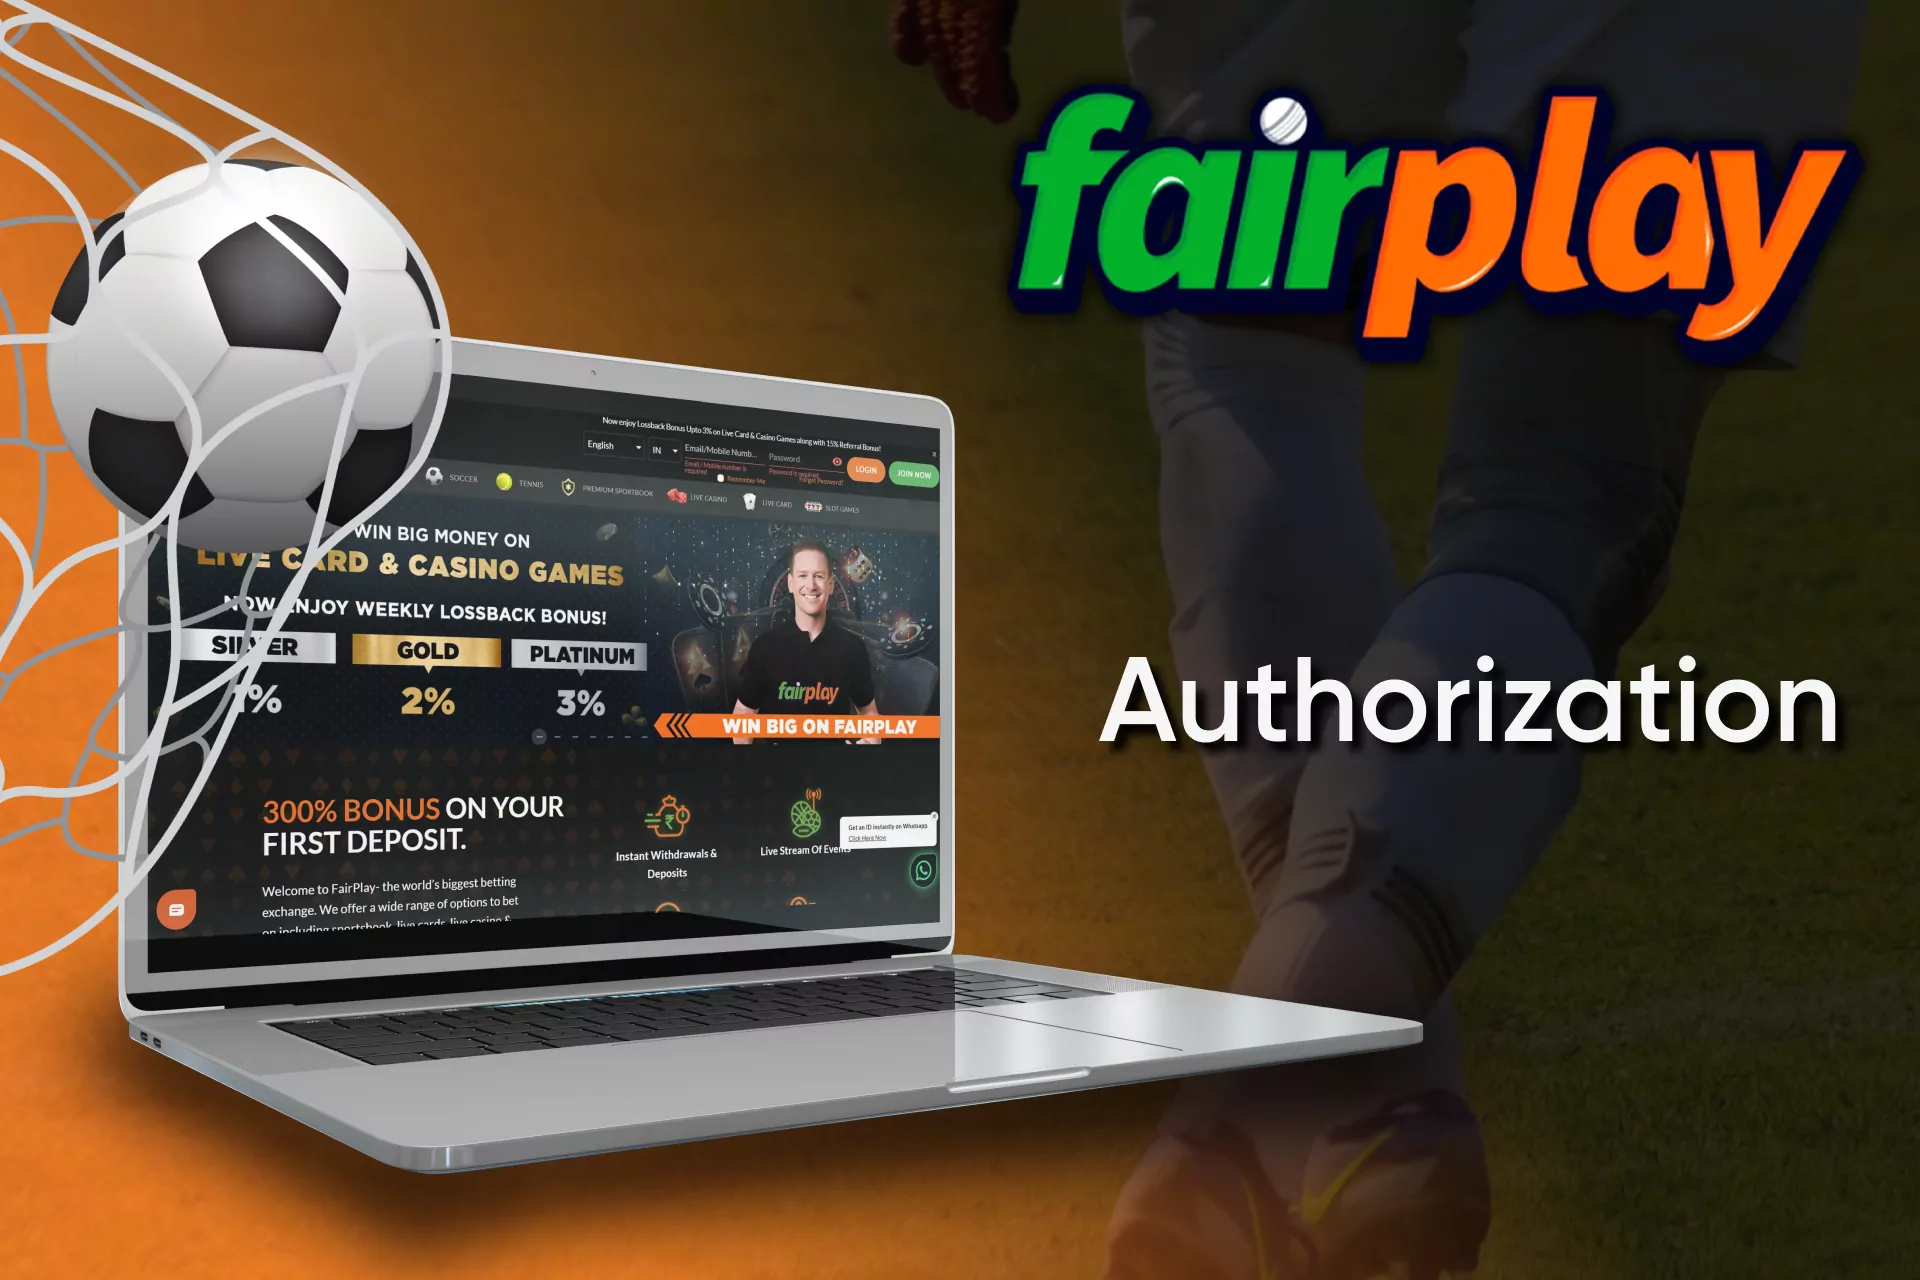 Log into the Fairplay account to start betting or gambling.